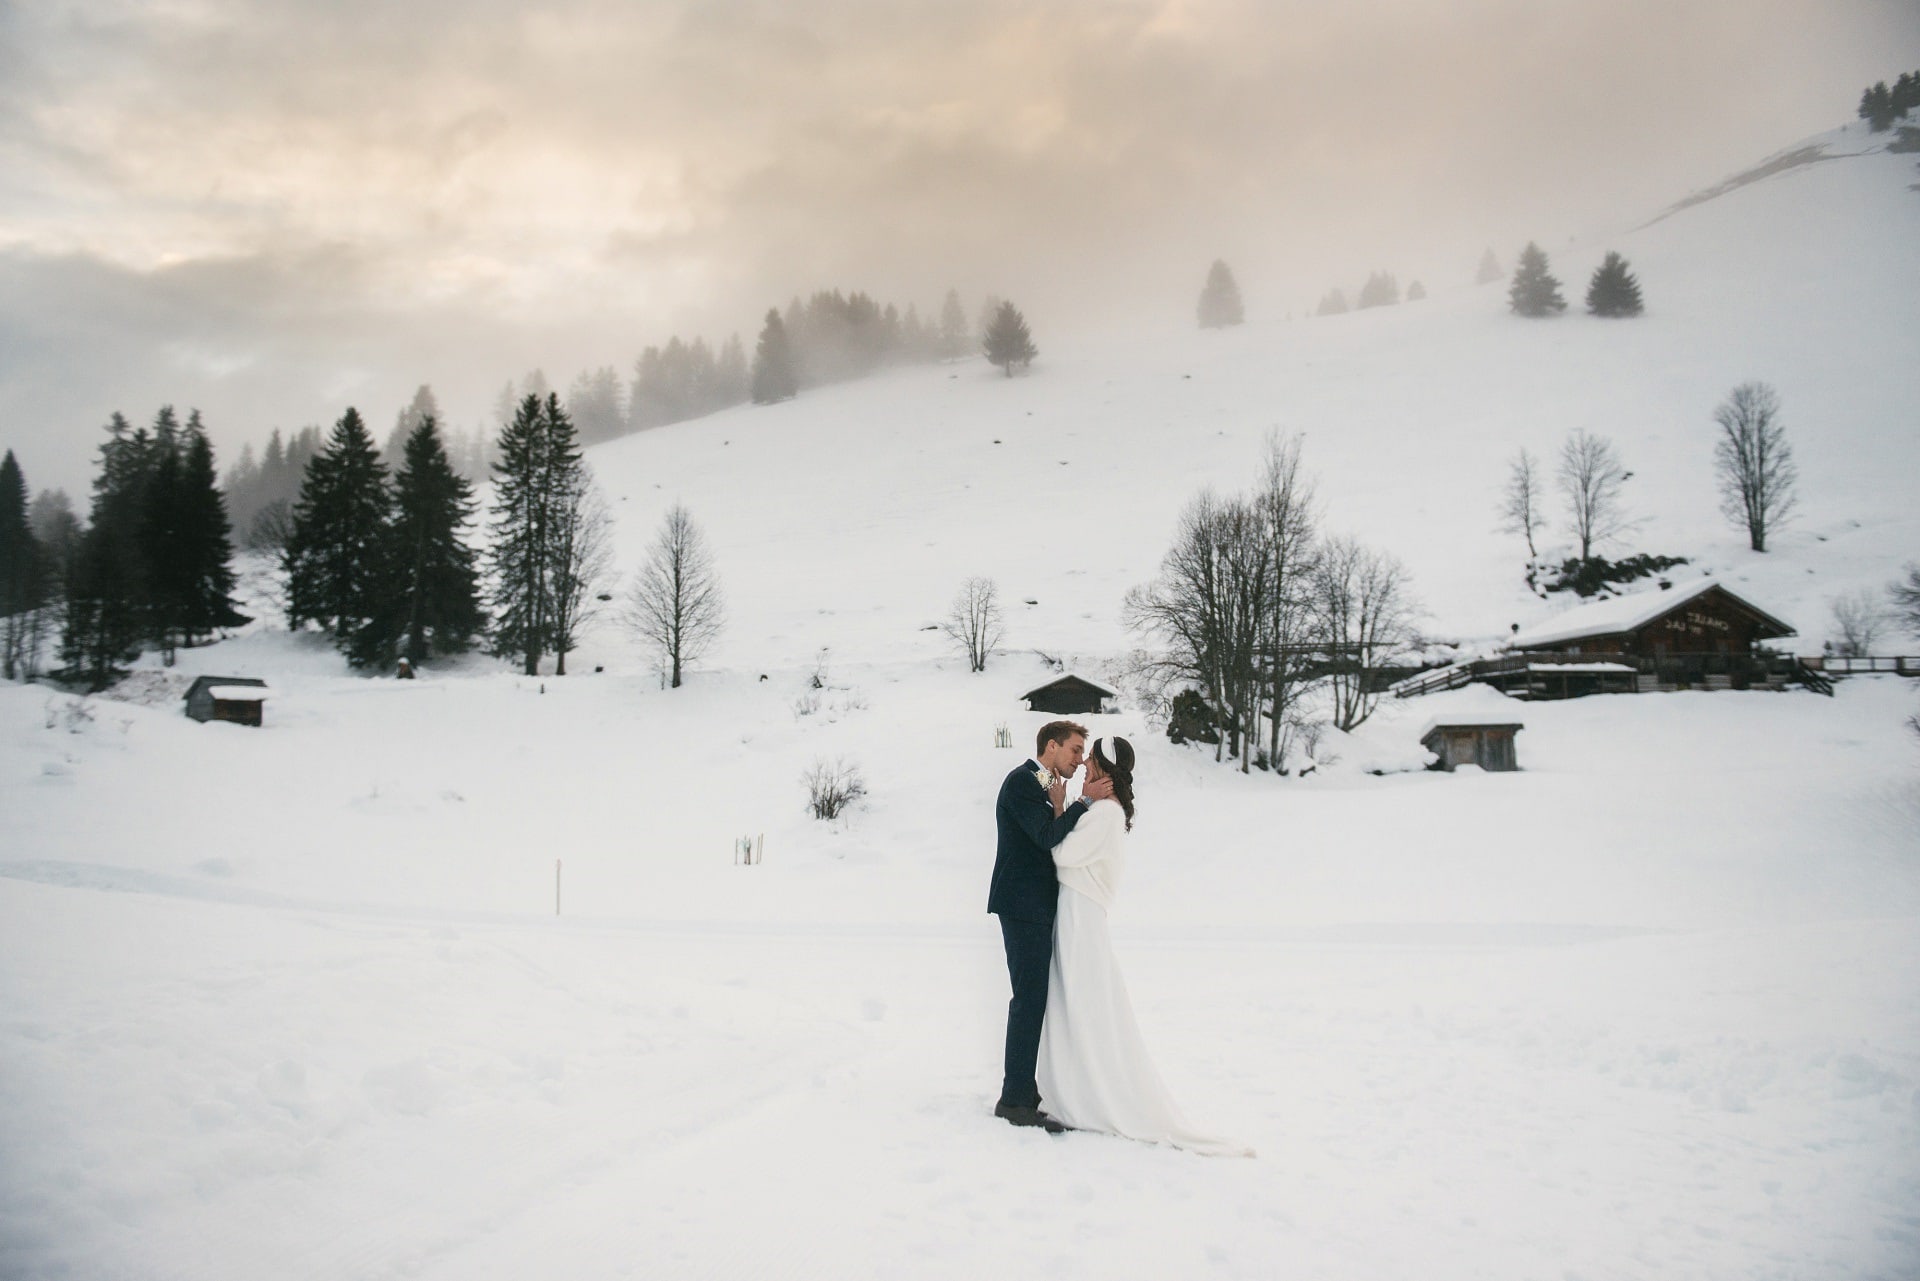 What to wear for an elopement in Switzerland